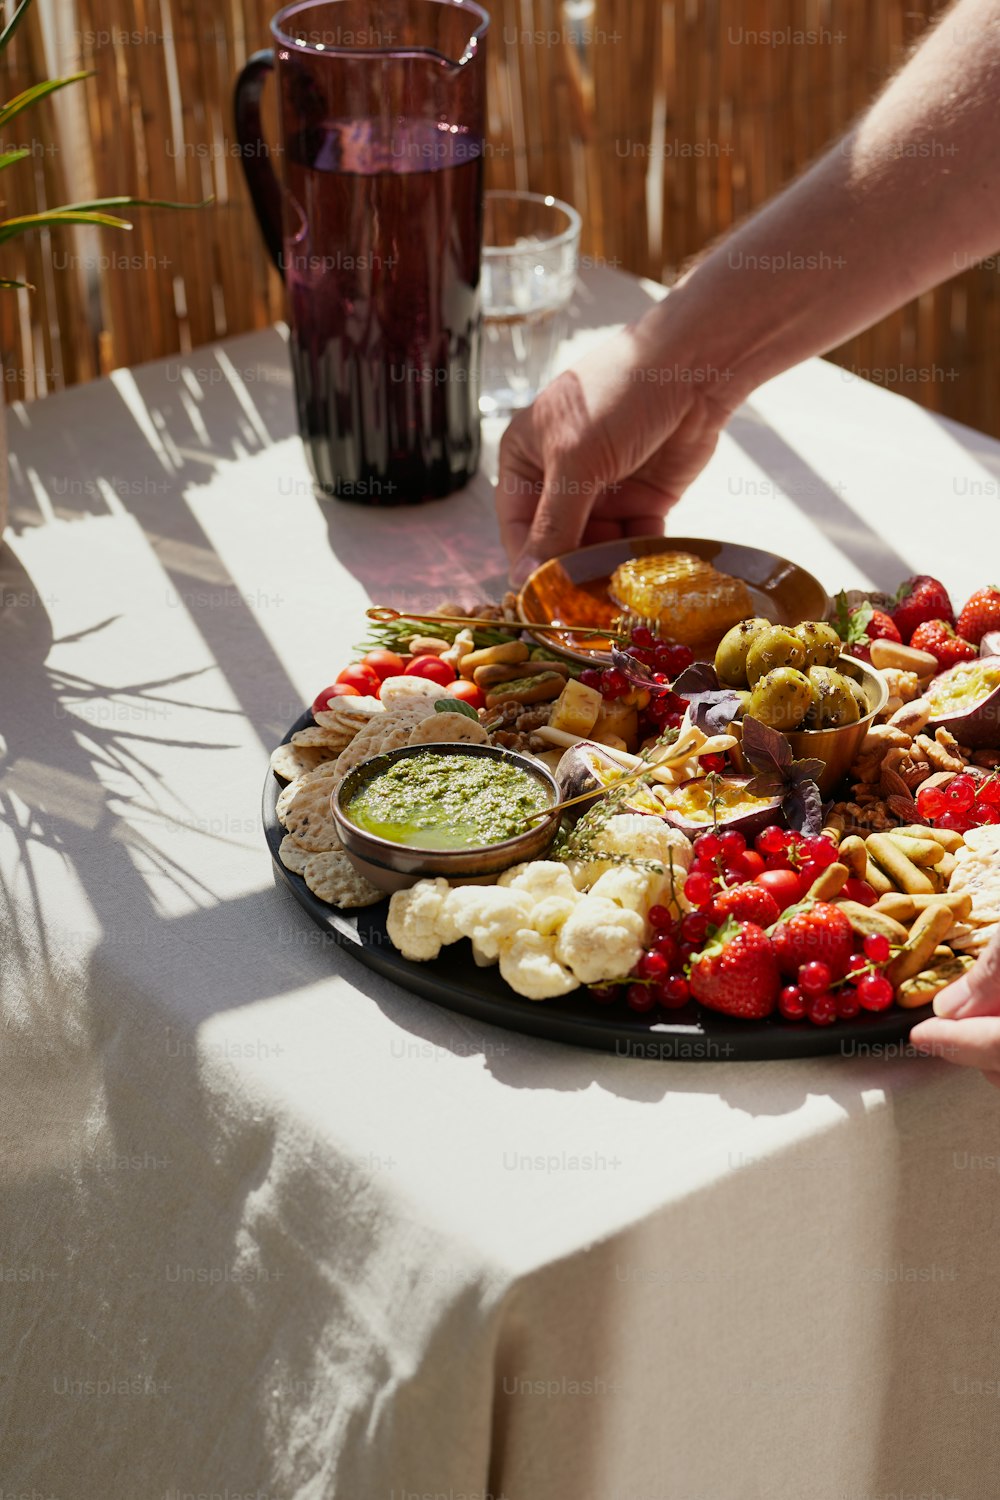 a platter of food is being served on a table